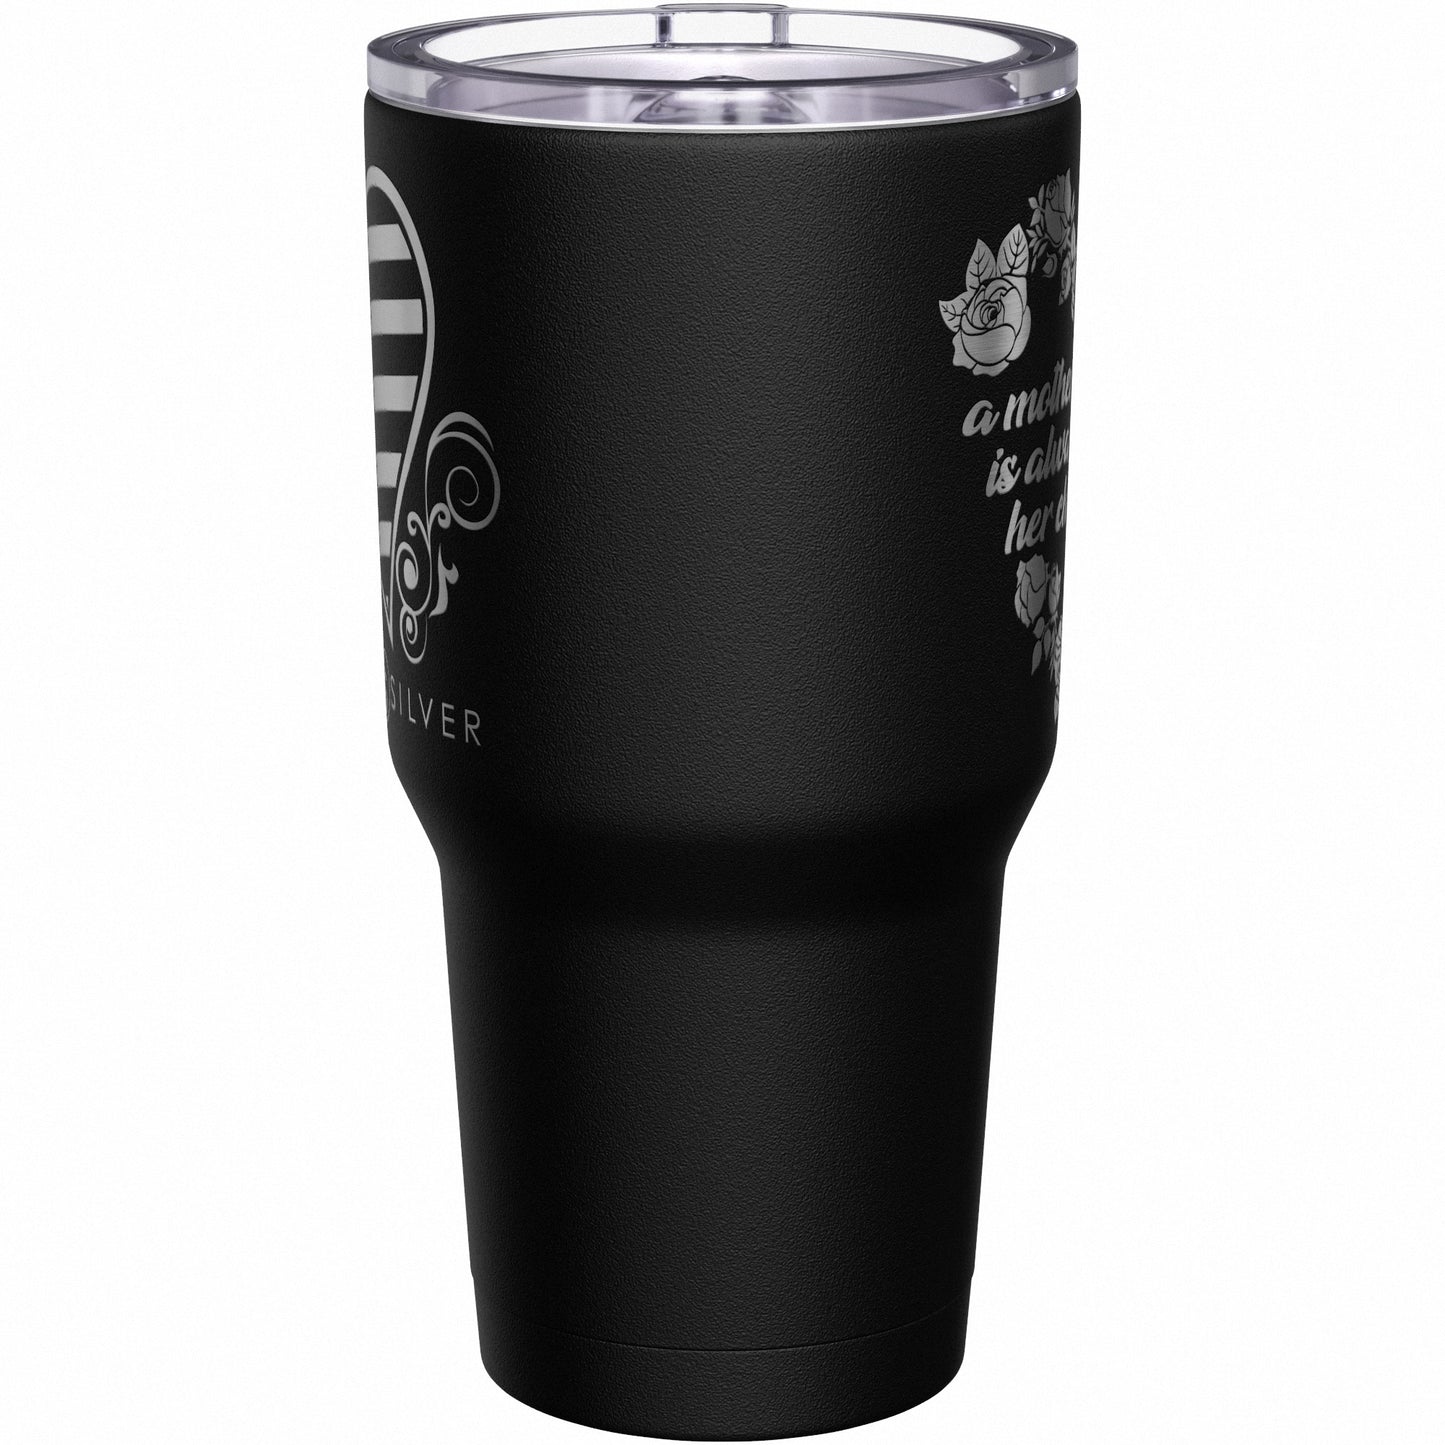 A Mother's Heart Is Always with Her Children Tumbler